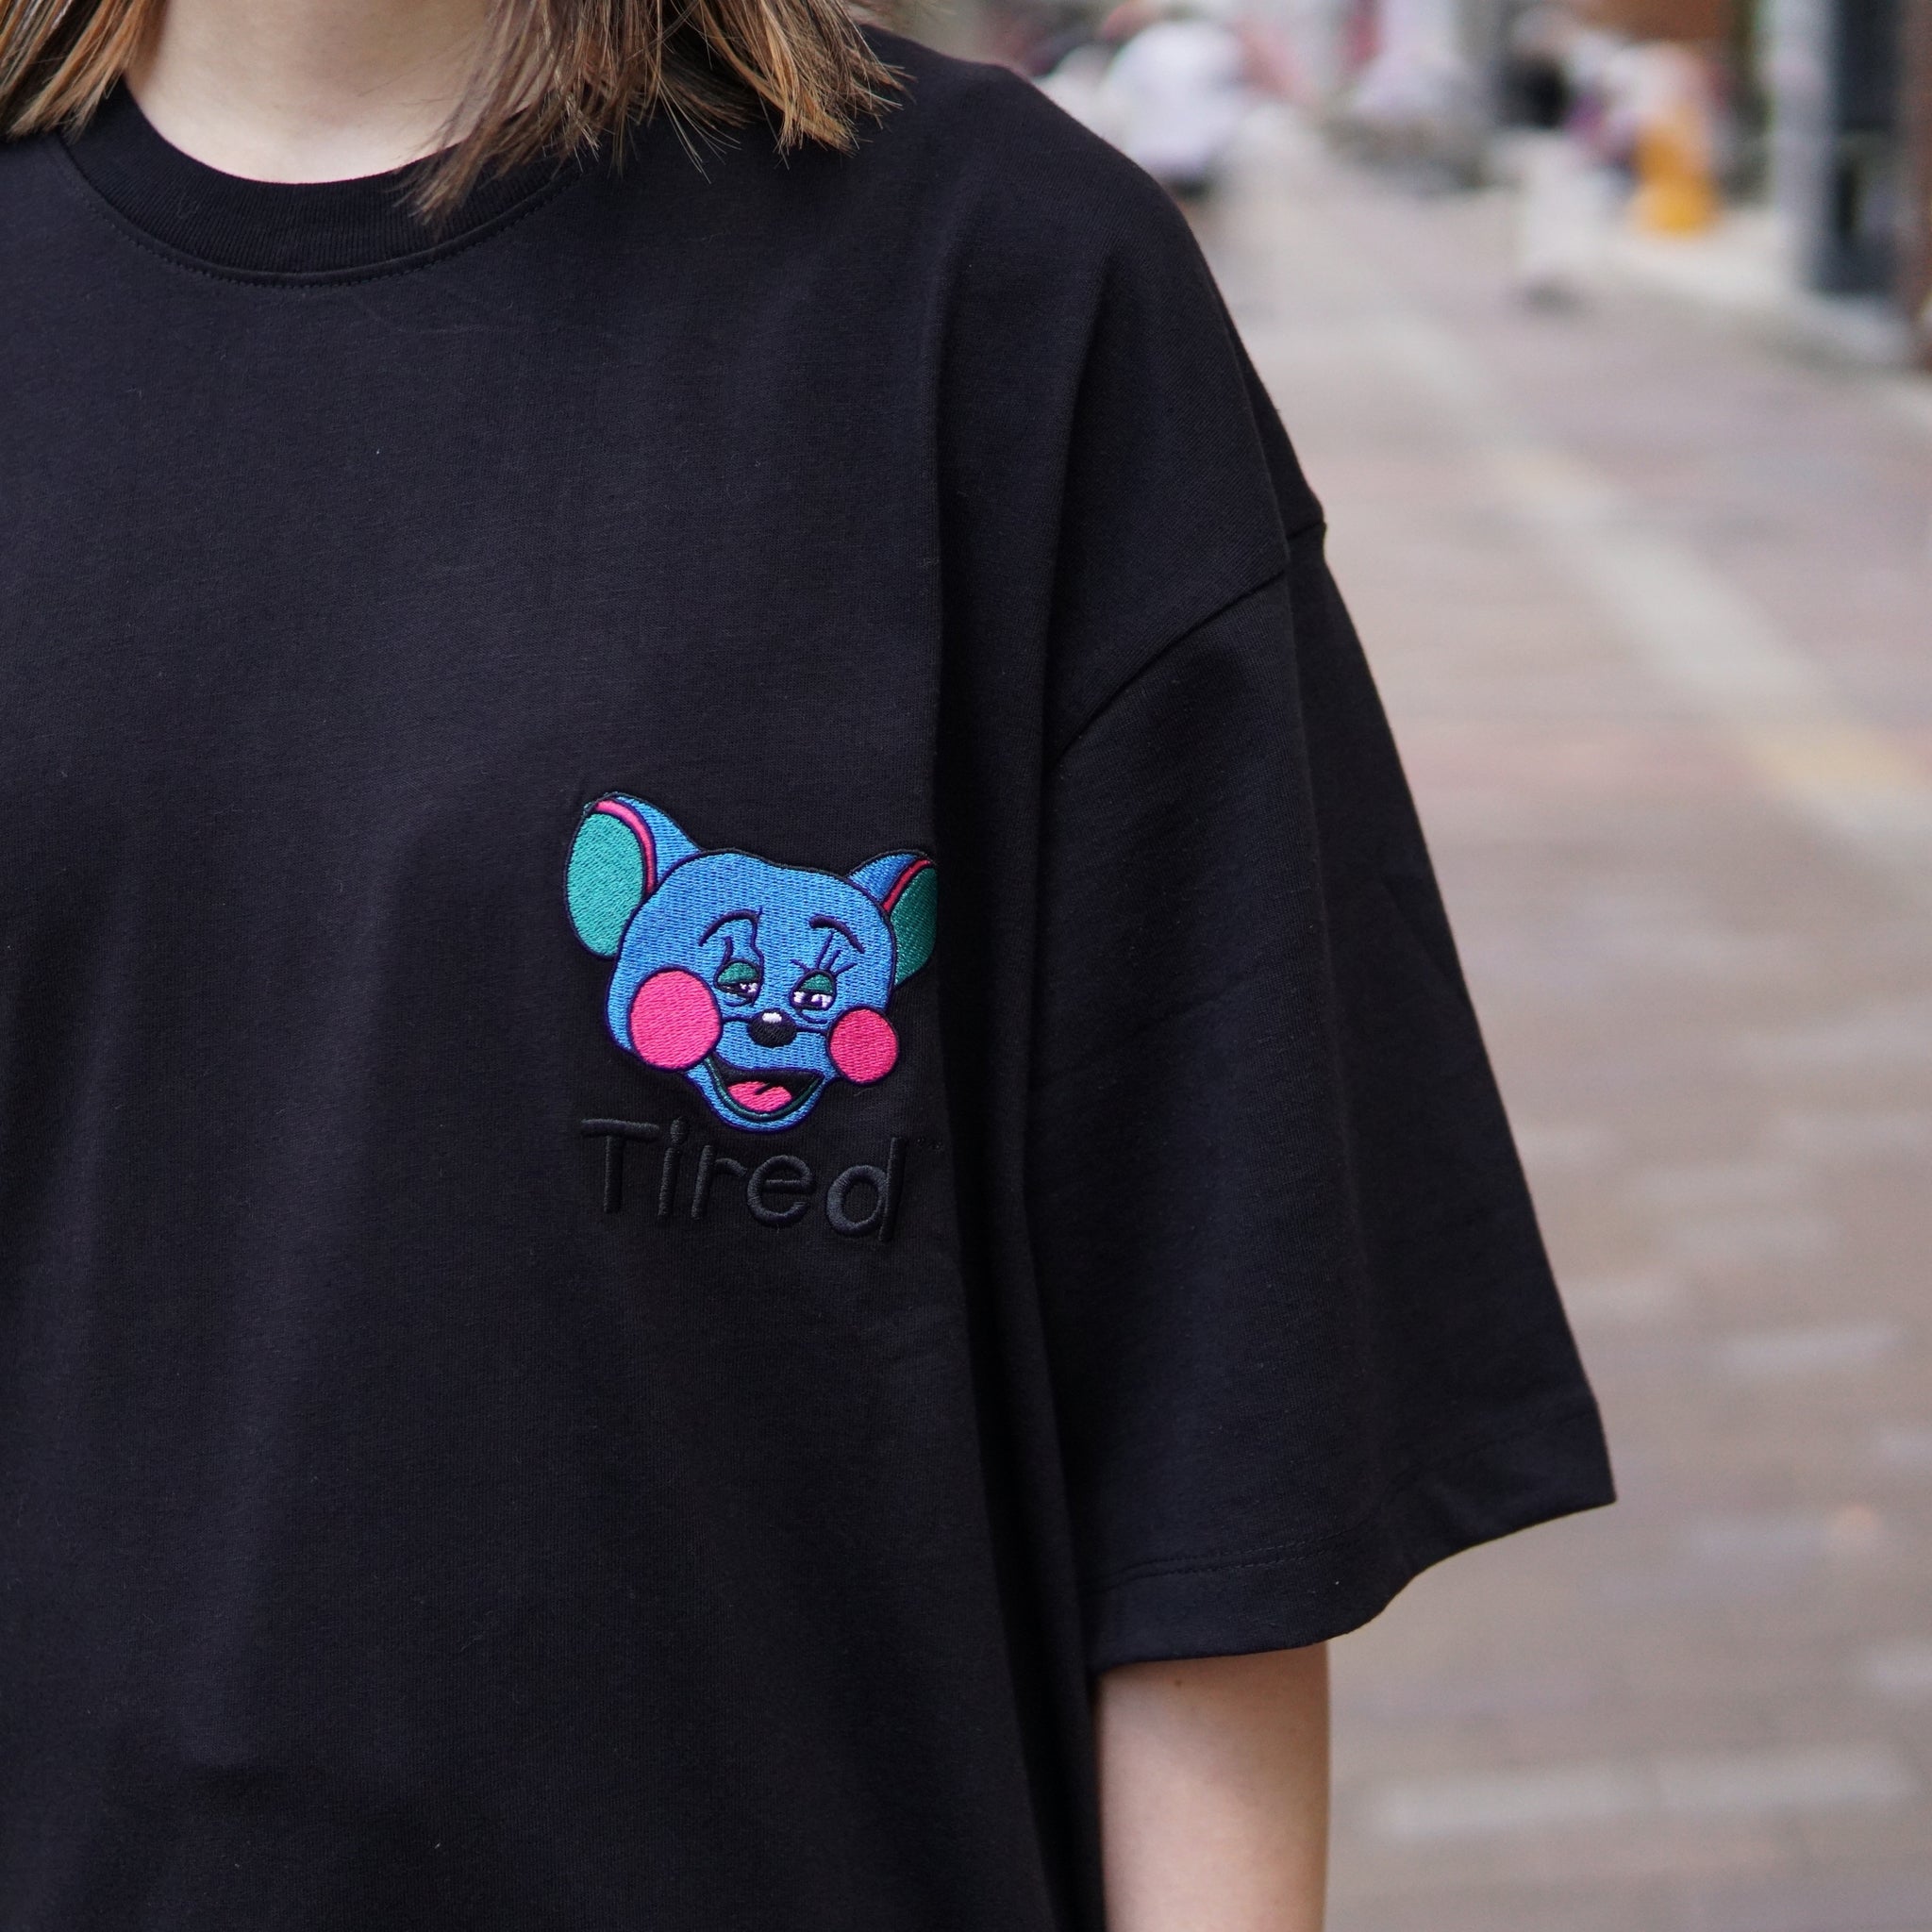 No:TS00183 | Name:TIPSY MOUSE EMBROIDERED SS TEE | Color:Black【TIRED_タイレッド】【ネコポス選択可能】